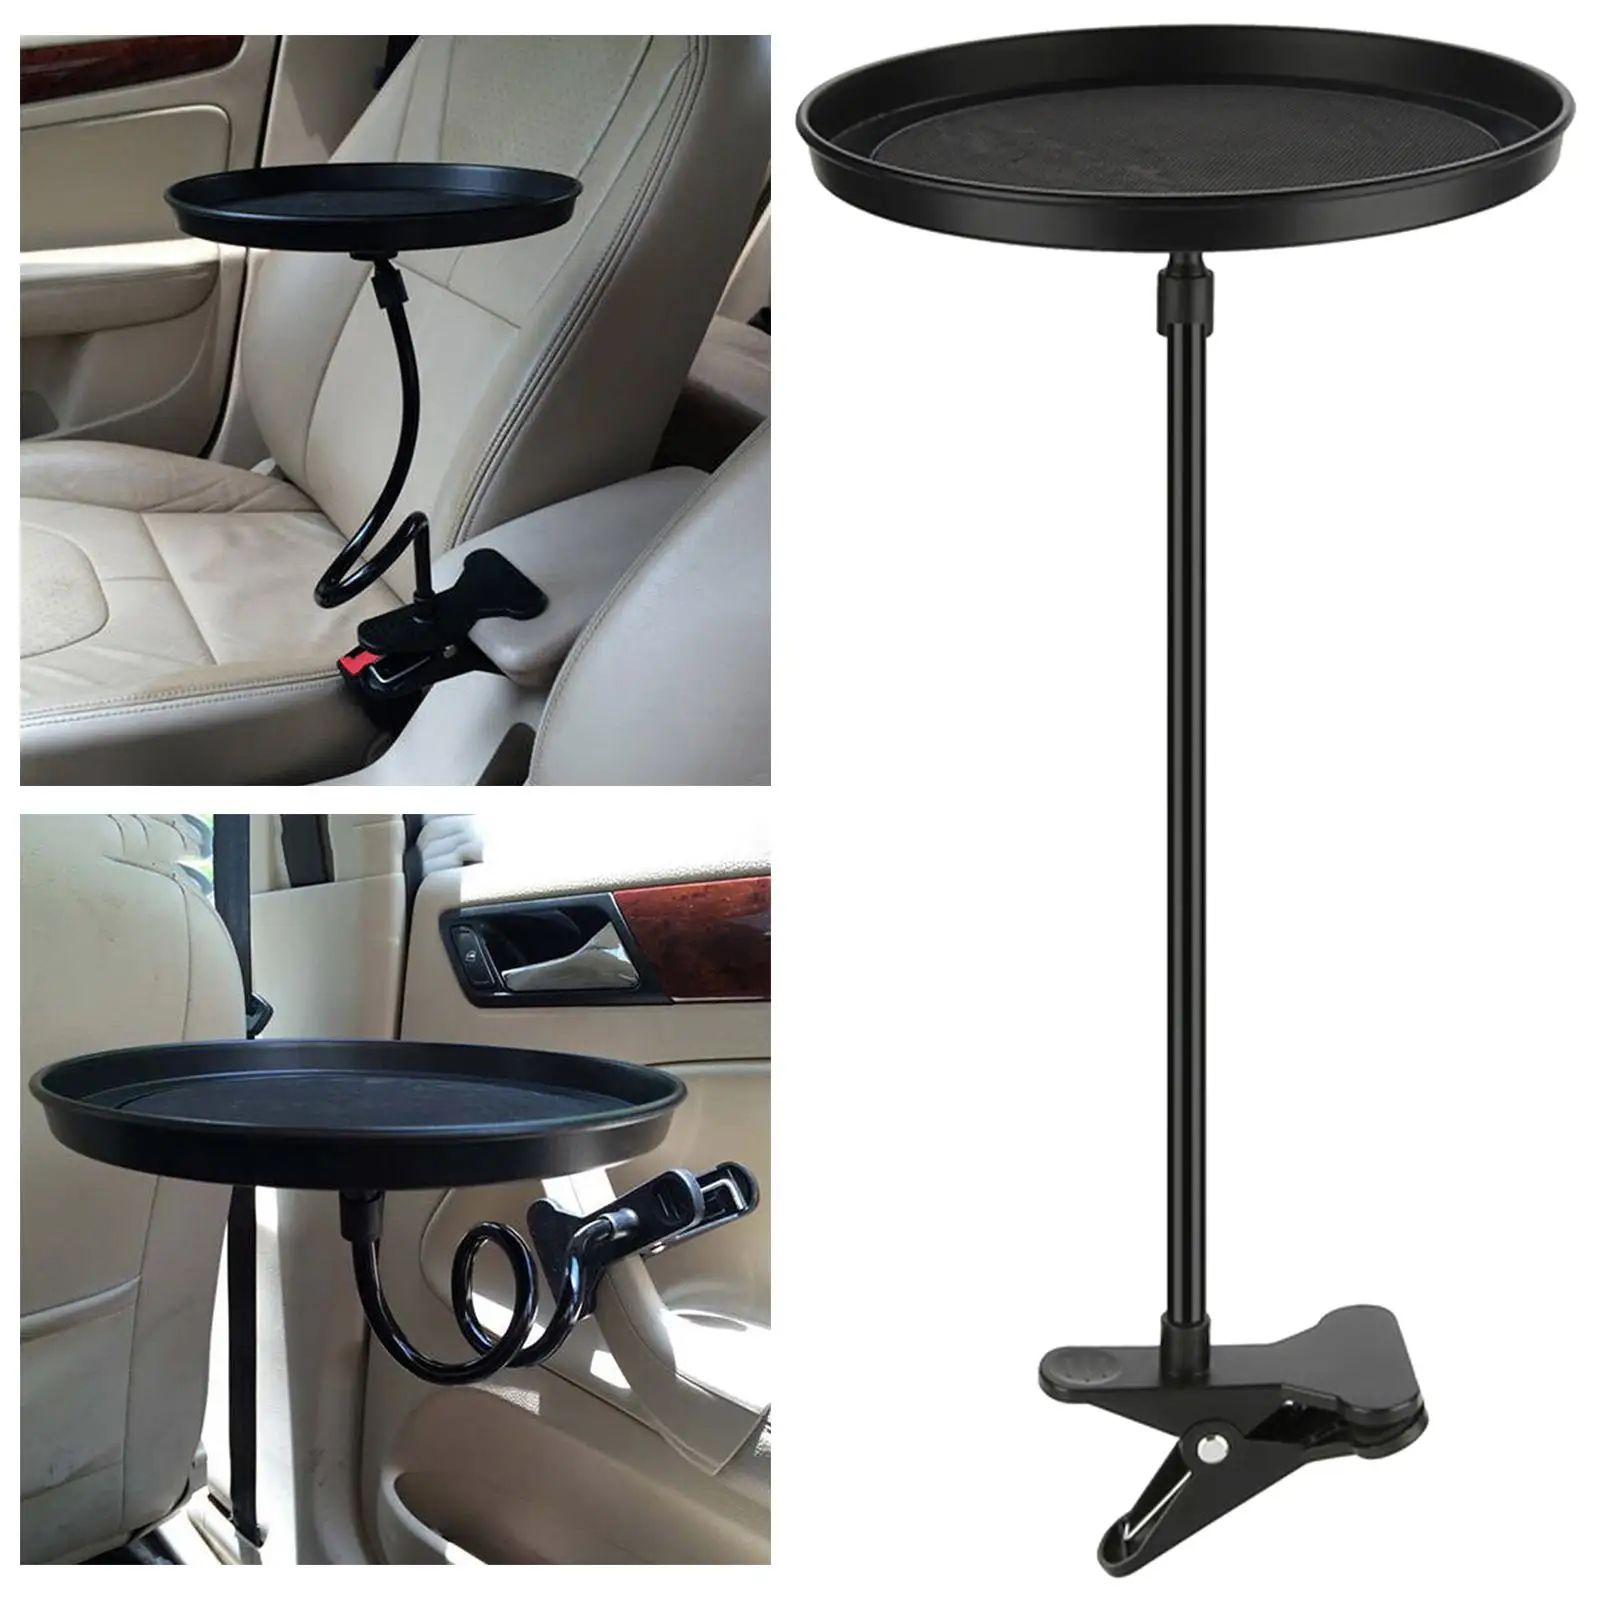 Car Food Tray Non-Skid Stand W/ Clamp for Passenger Seat Auto